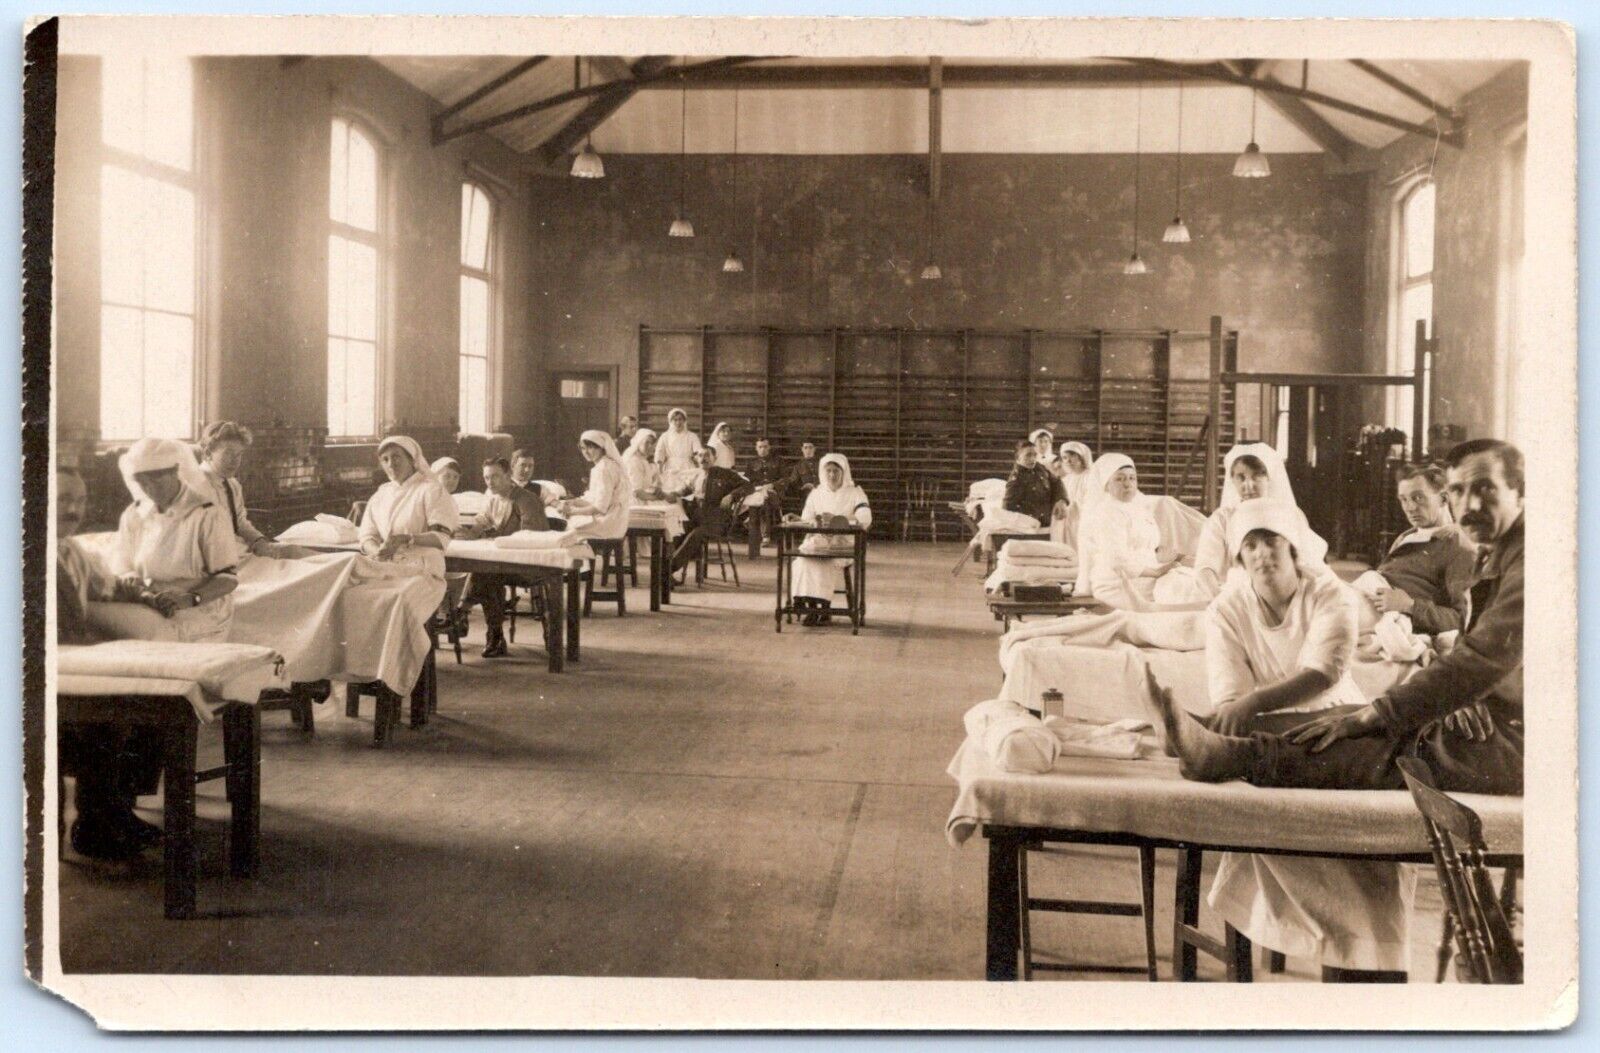 Postcard RPPC England British Hospital Nurses WWI Soldiers Physical Therapy? R21